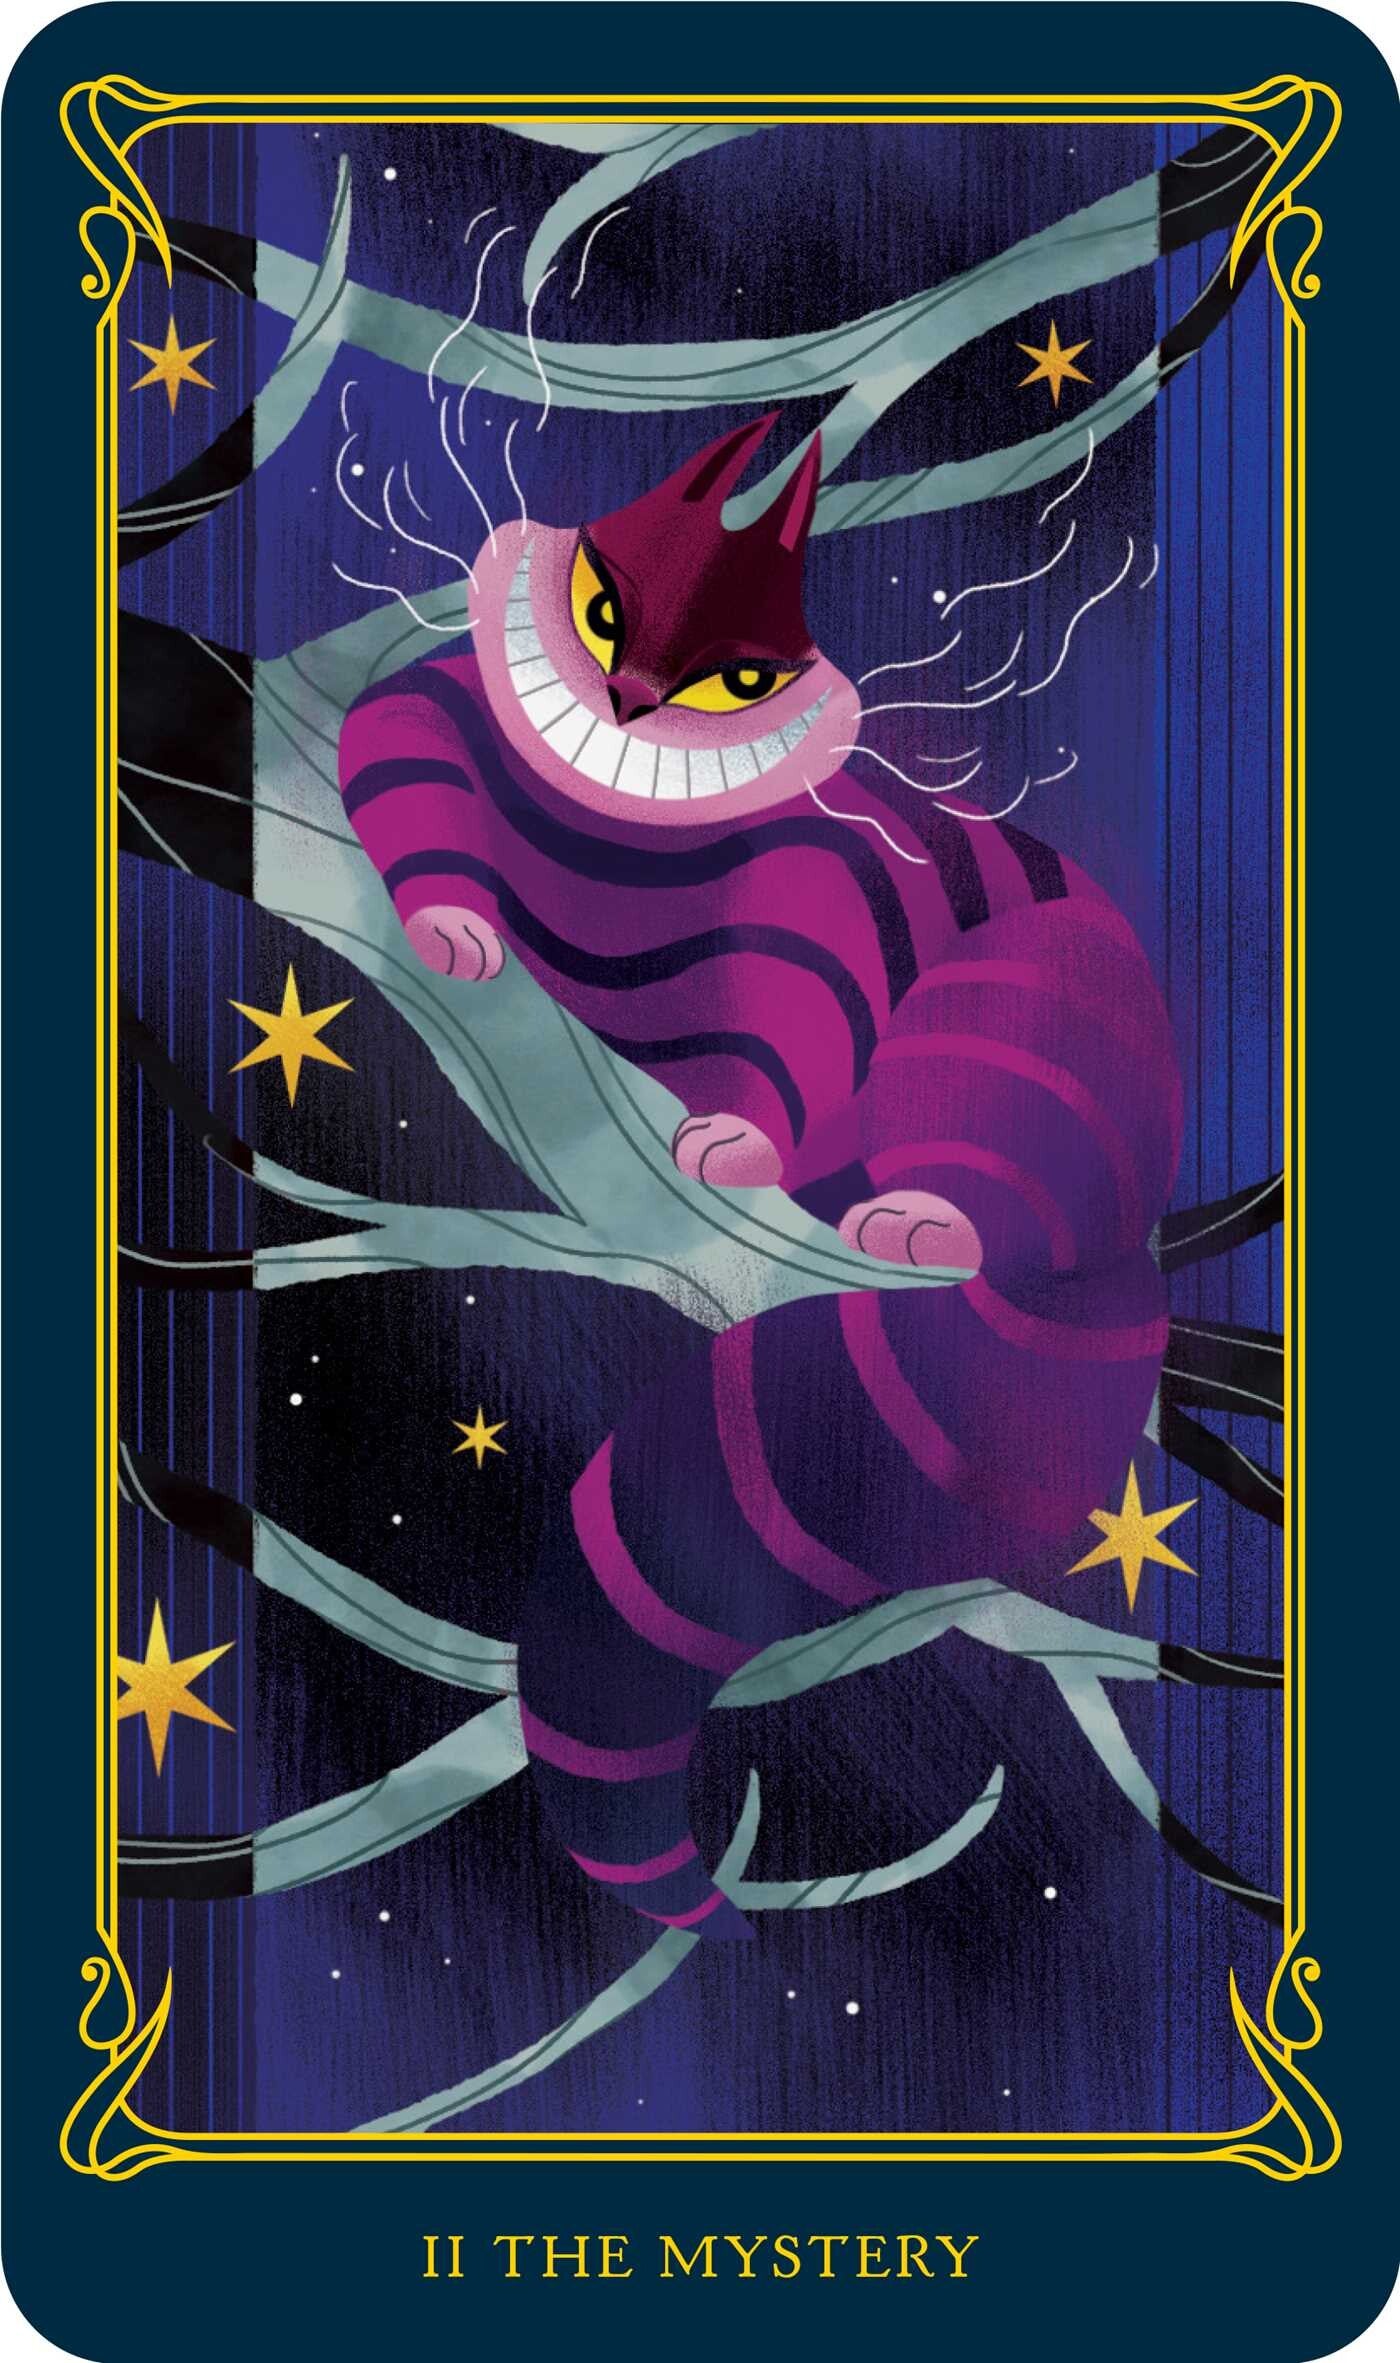 The High Priestess (The Mystery; Cheshire Cat) card